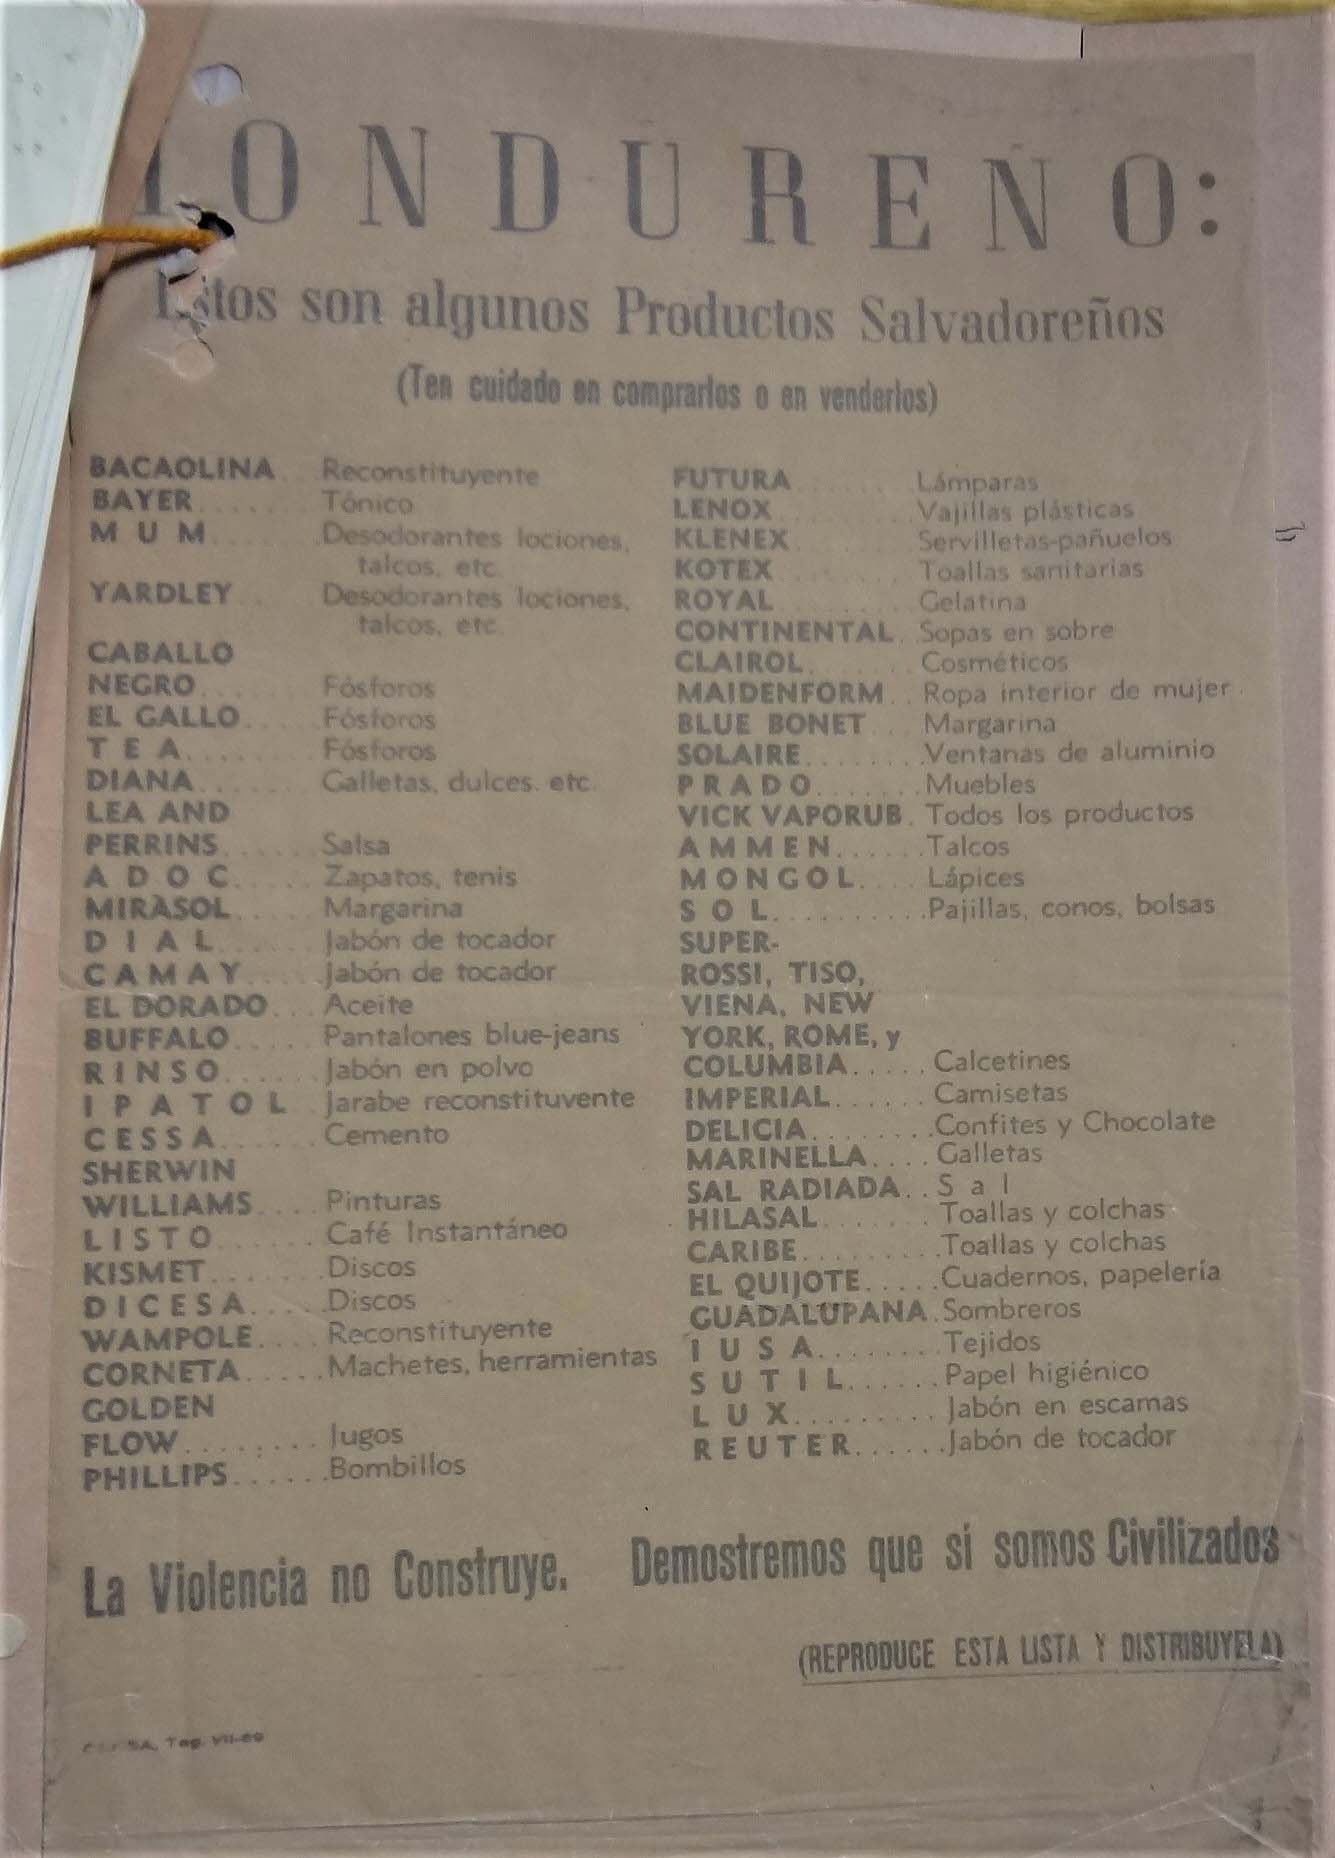 Handbill circulated in Honduras, urging people to boycott Salvadoran products, 1969 (catalogue reference: FCO 7/1212)